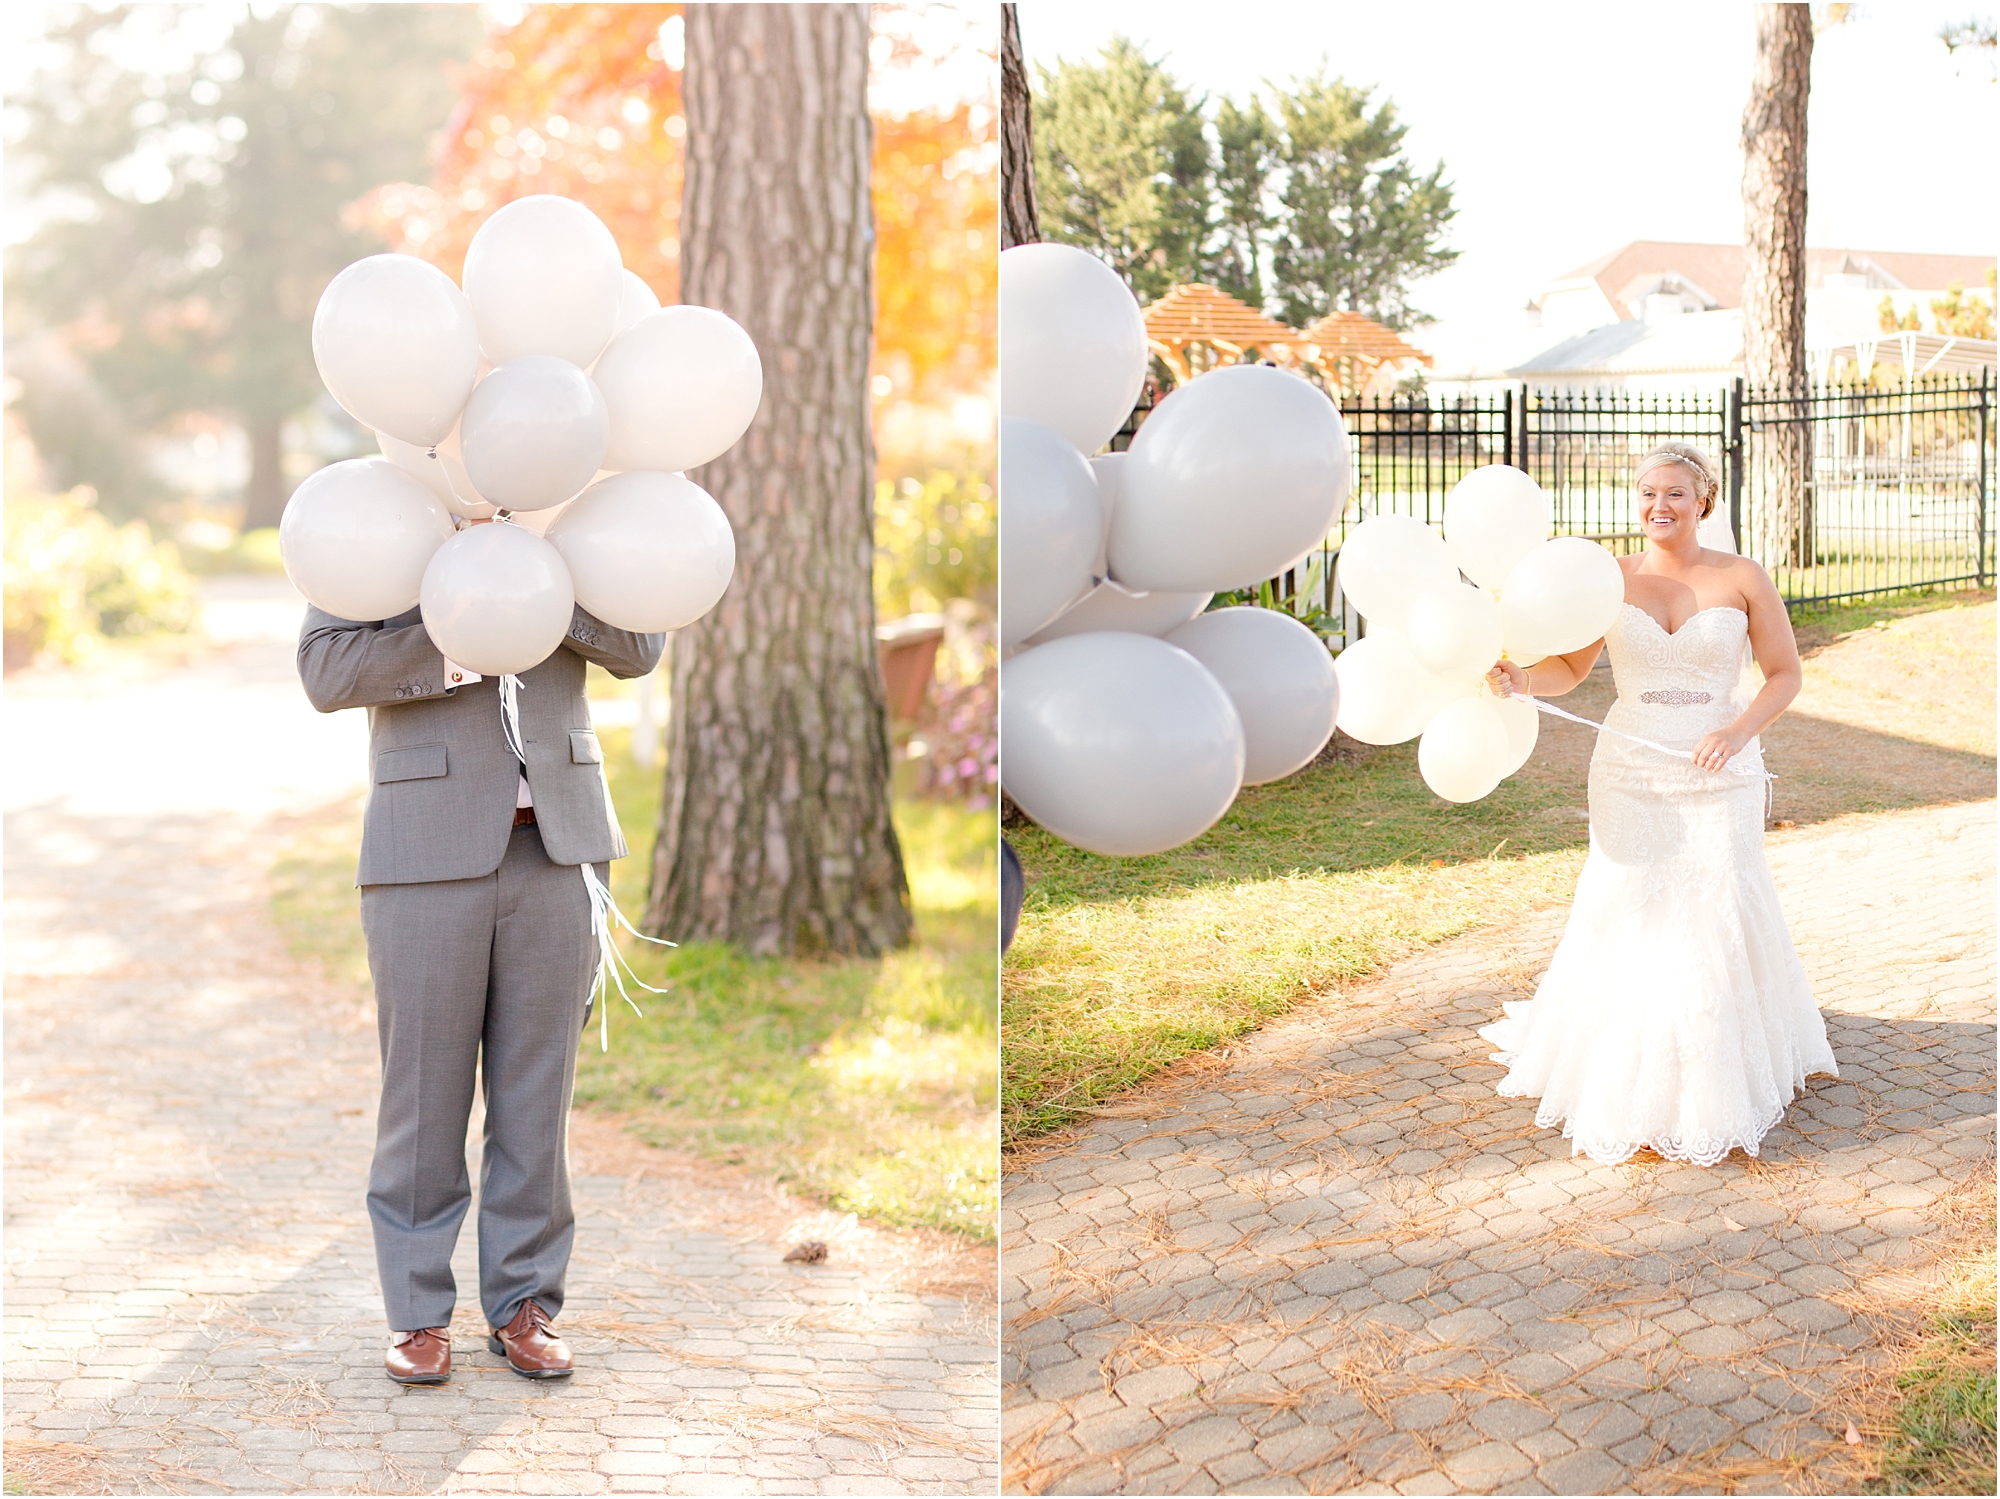  The both held a bunch of balloons and then let go of them when they did their first look. So cute! 